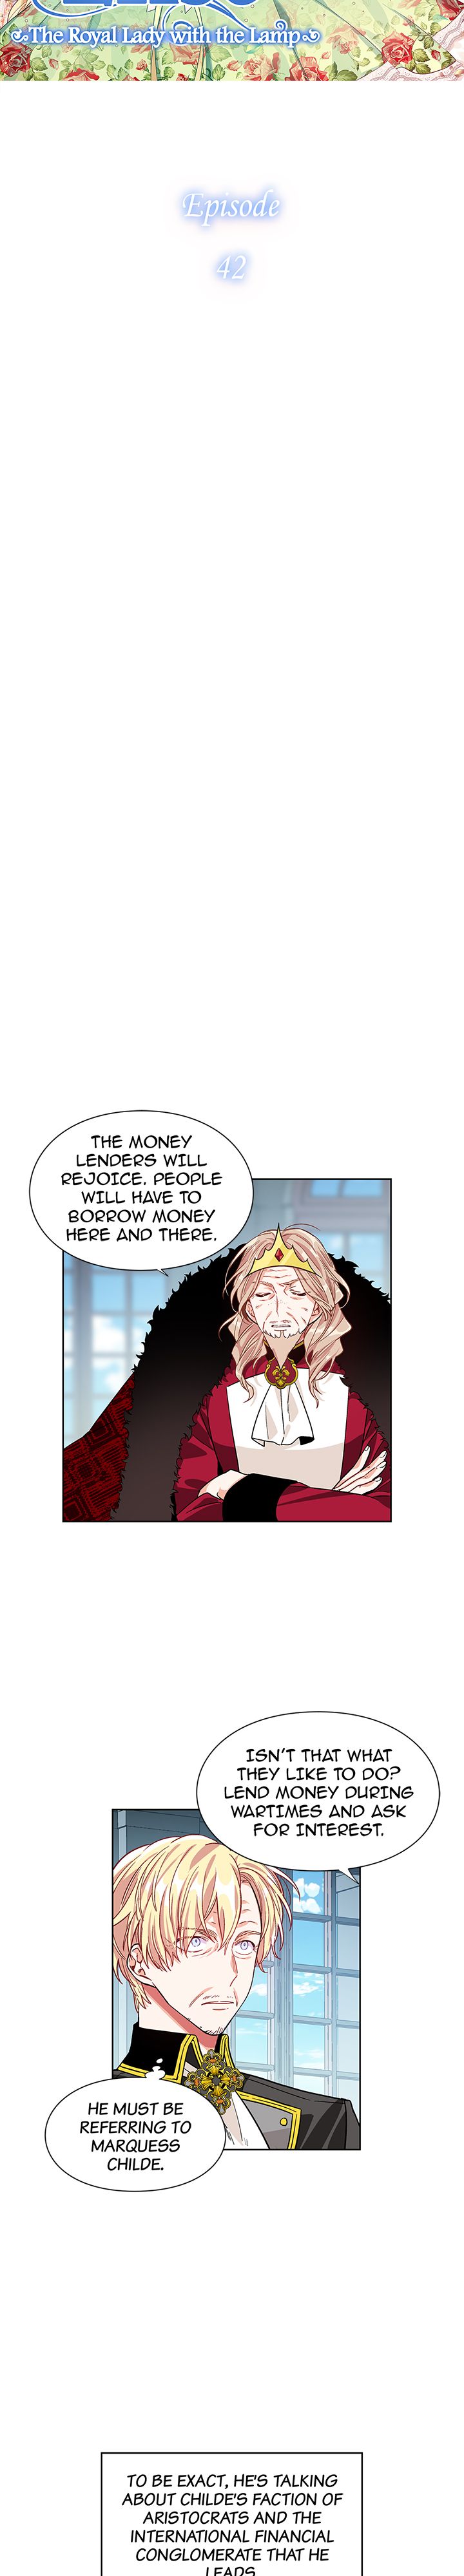 Doctor Elise – The Royal Lady with the Lamp - Chapter 42 Page 2